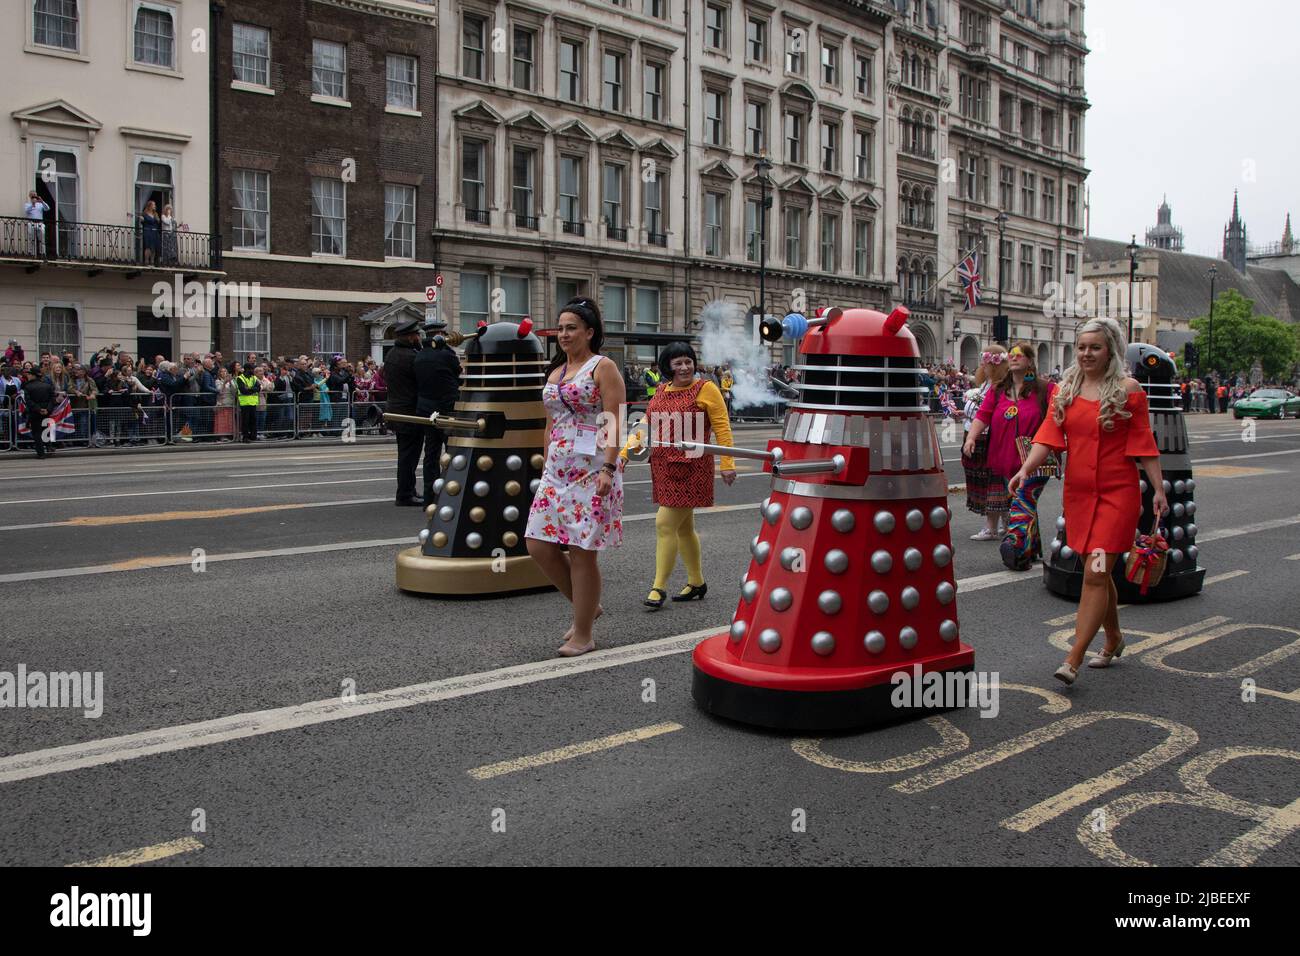 London, UK. 5th June 2022. Daleks take part in the Platinum Jubilee Pageant to mark her Majesty's 70 years on the throne. The 3km parade is led by the golden state coach, a 260 year old carriage that carried the Queen to and from her coronation in 1953.  Credit: Kiki Streitberger / Alamy Live News Stock Photo